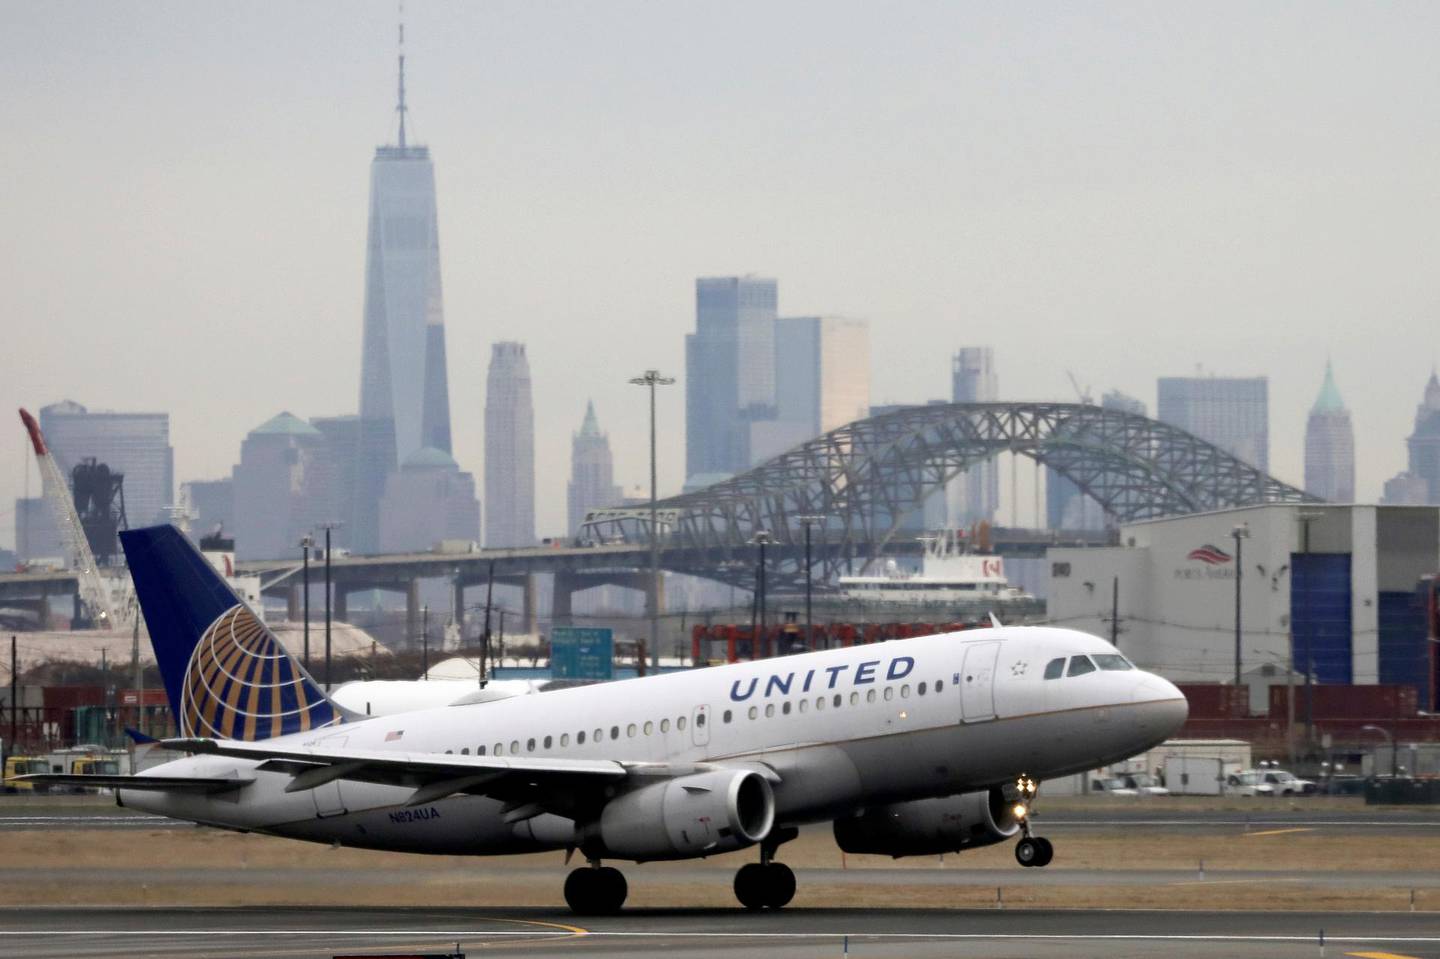 FILE PHOTO: A United Airlines passenger jet takes off with New York City as a backdrop, at Newark Liberty International Airport, New Jersey, U.S. December 6, 2019. REUTERS/Chris Helgren/File Photo  GLOBAL BUSINESS WEEK AHEAD